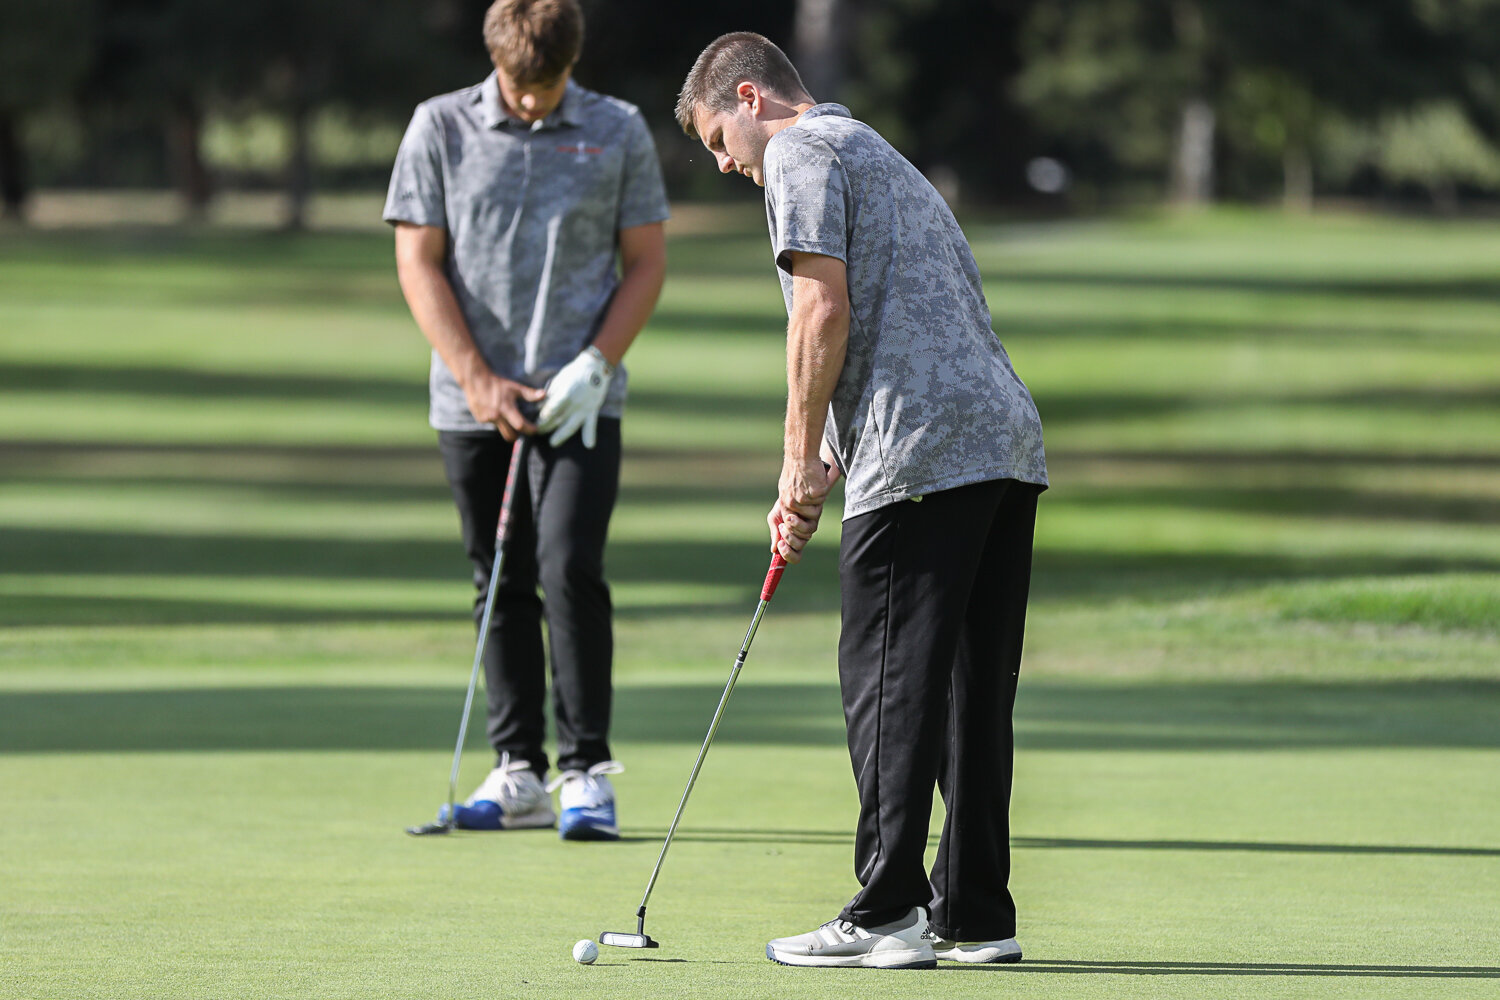 Centralia's Brady Sprague putts the ball during the Tigers' meetup with W.F. West at Riverside Golf Course on Sept. 20.